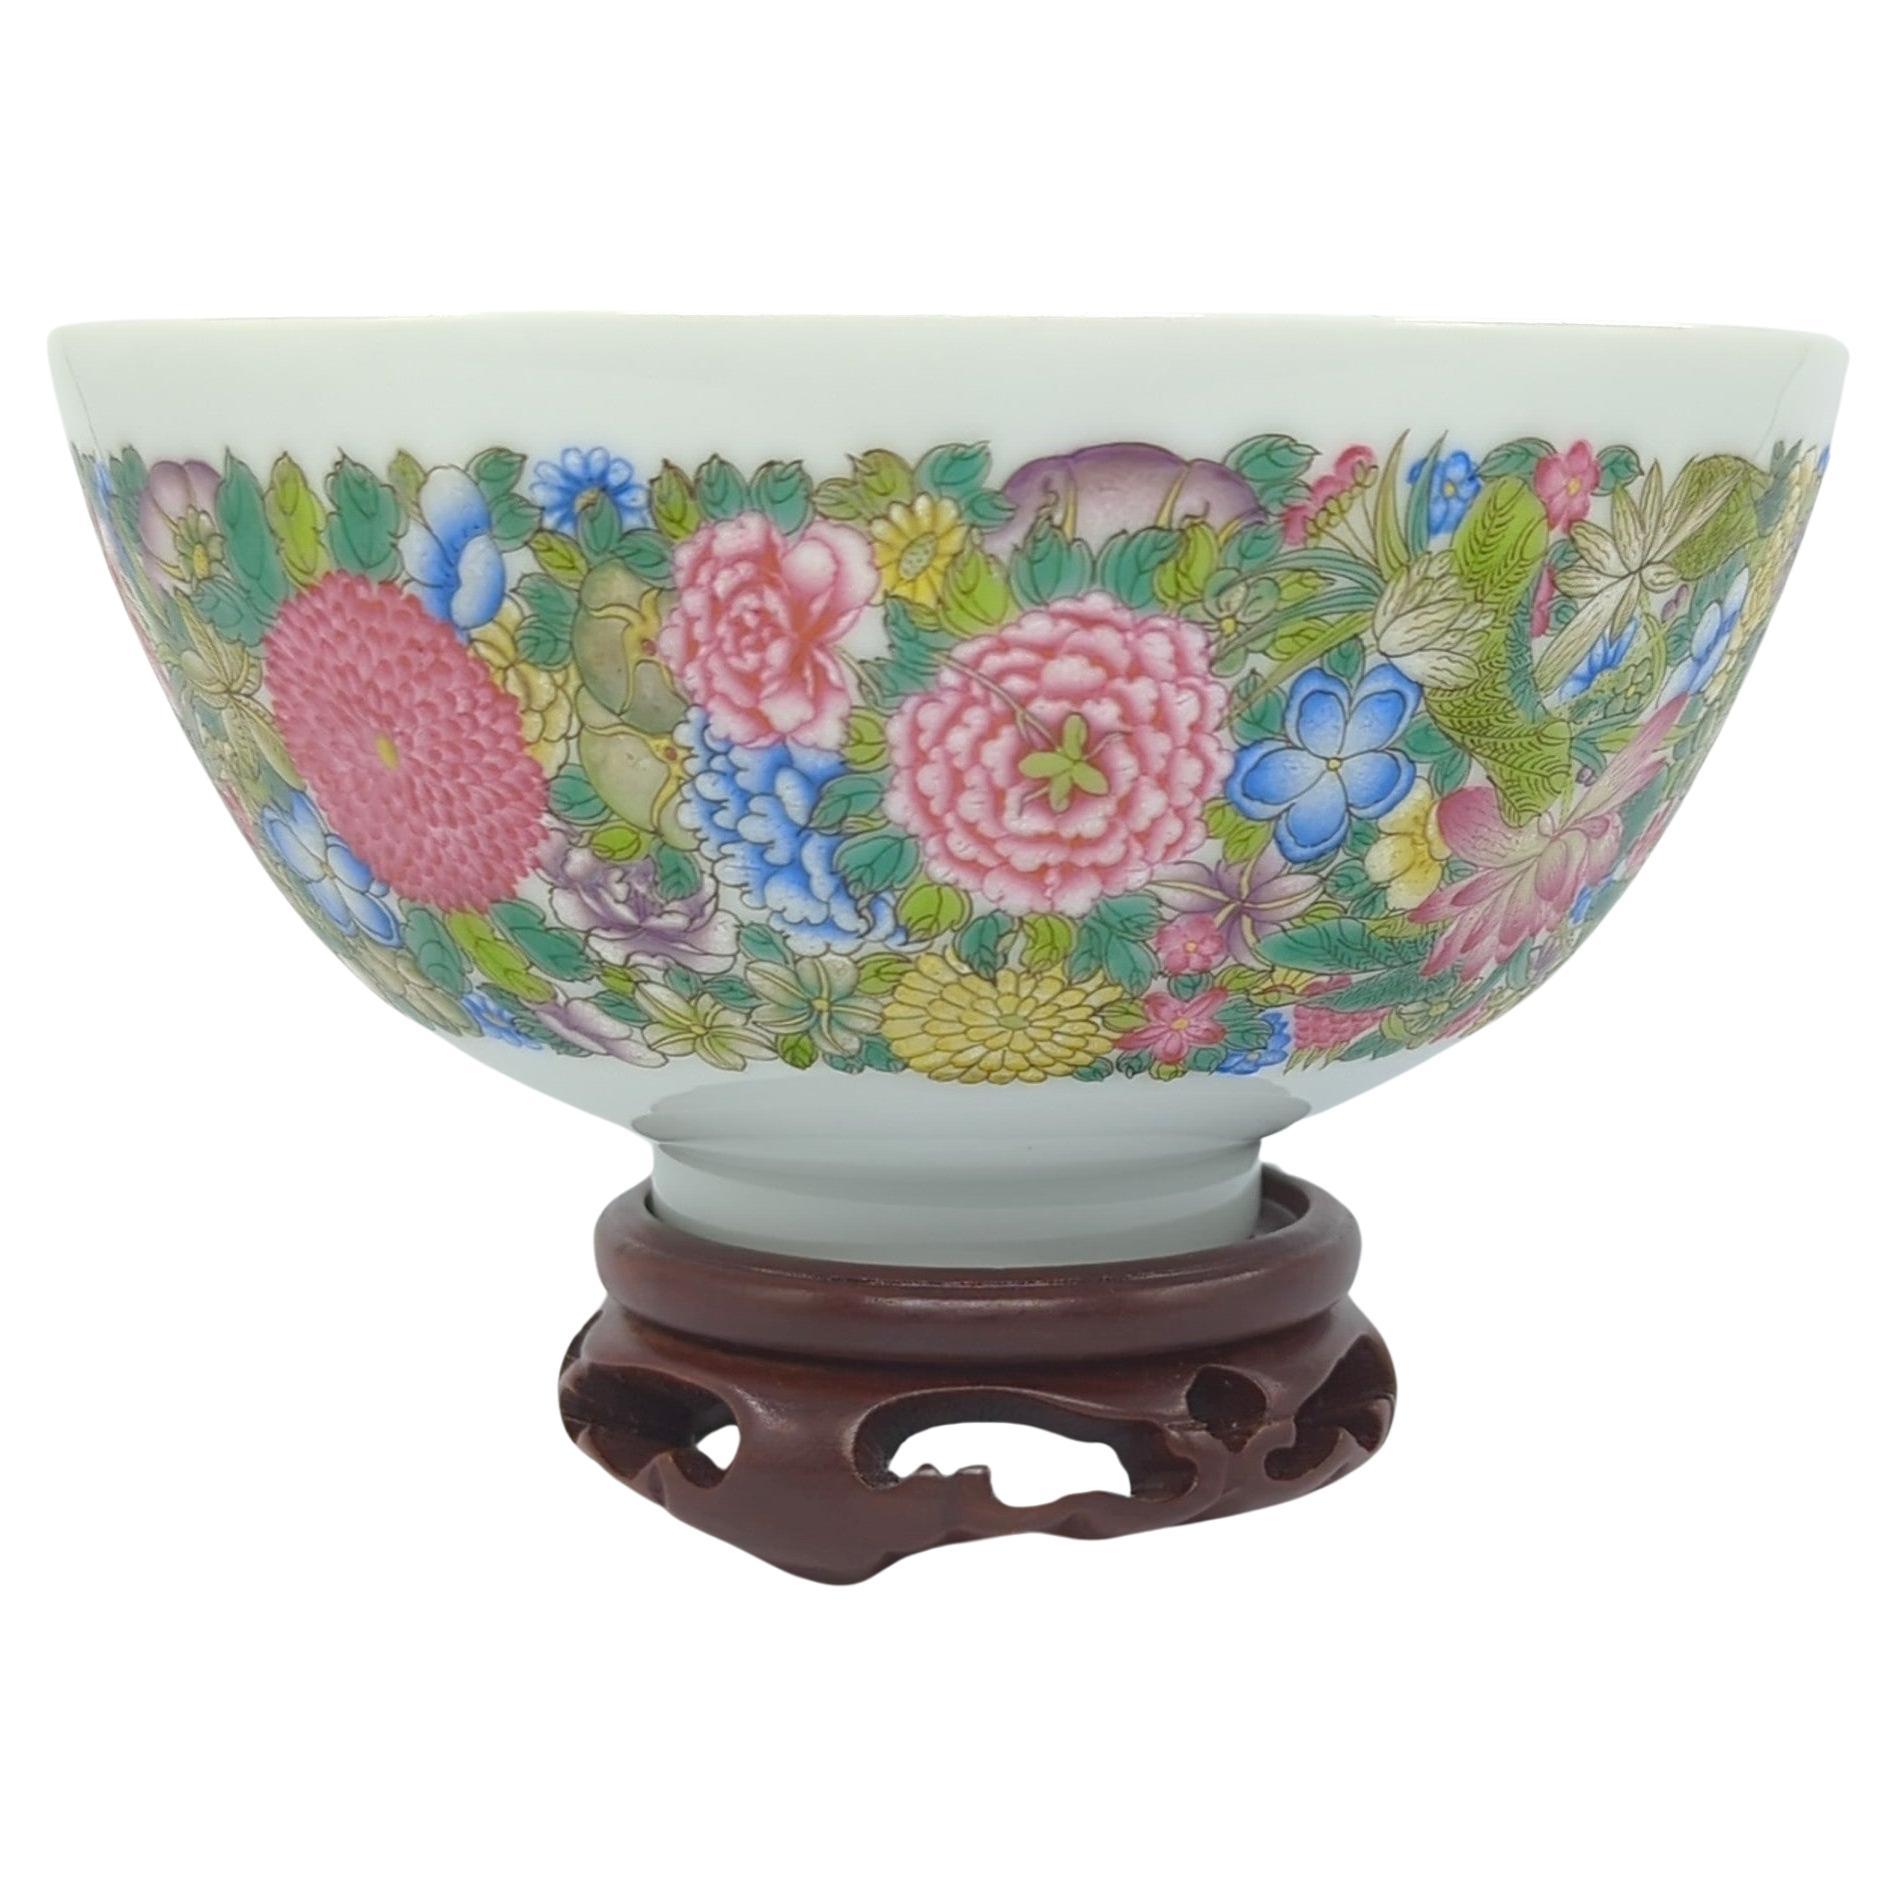 This finely decorated Chinese porcelain bowl is a stunning example of 20th-century craftsmanship, embodying both artistic mastery and cultural significance. The bowl is adorned with a vibrant band of mille fleur flowers on the exterior, a design